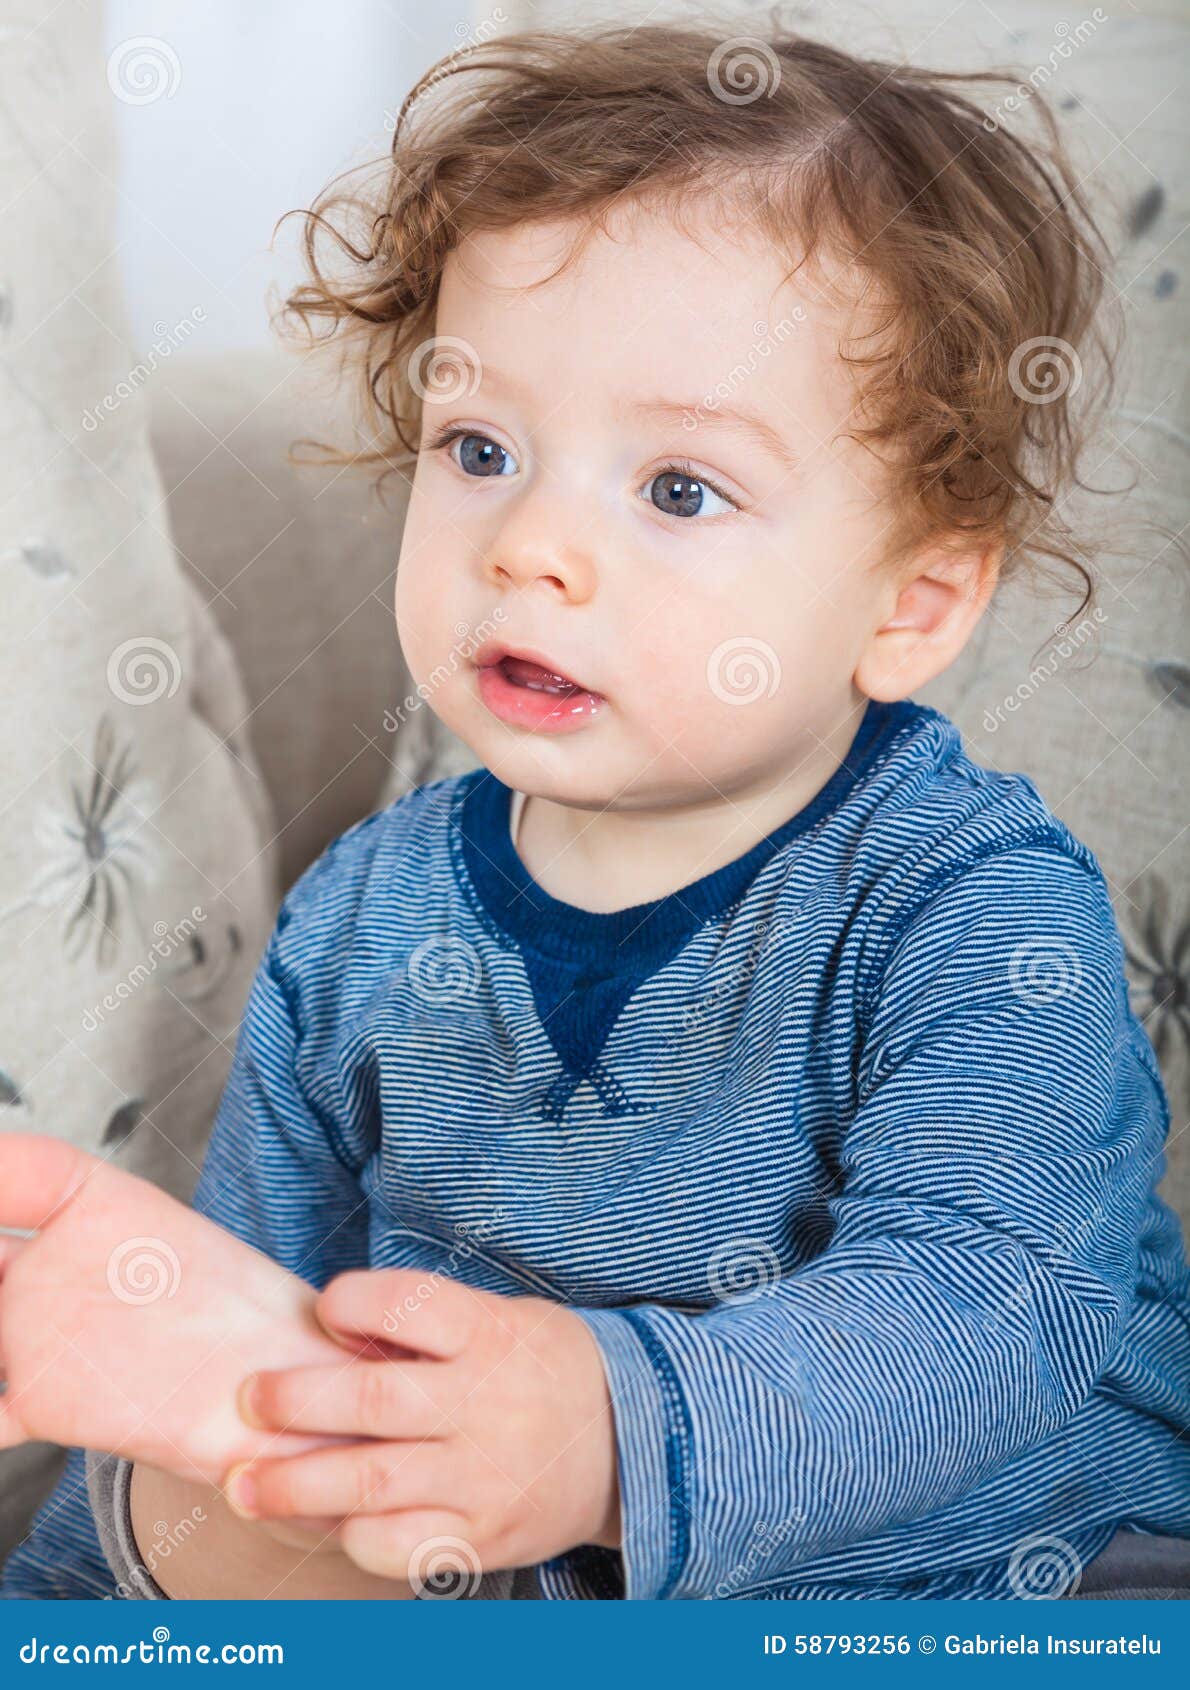 Baby boy with curly hair stock photo. Image of long, infant - 58793256